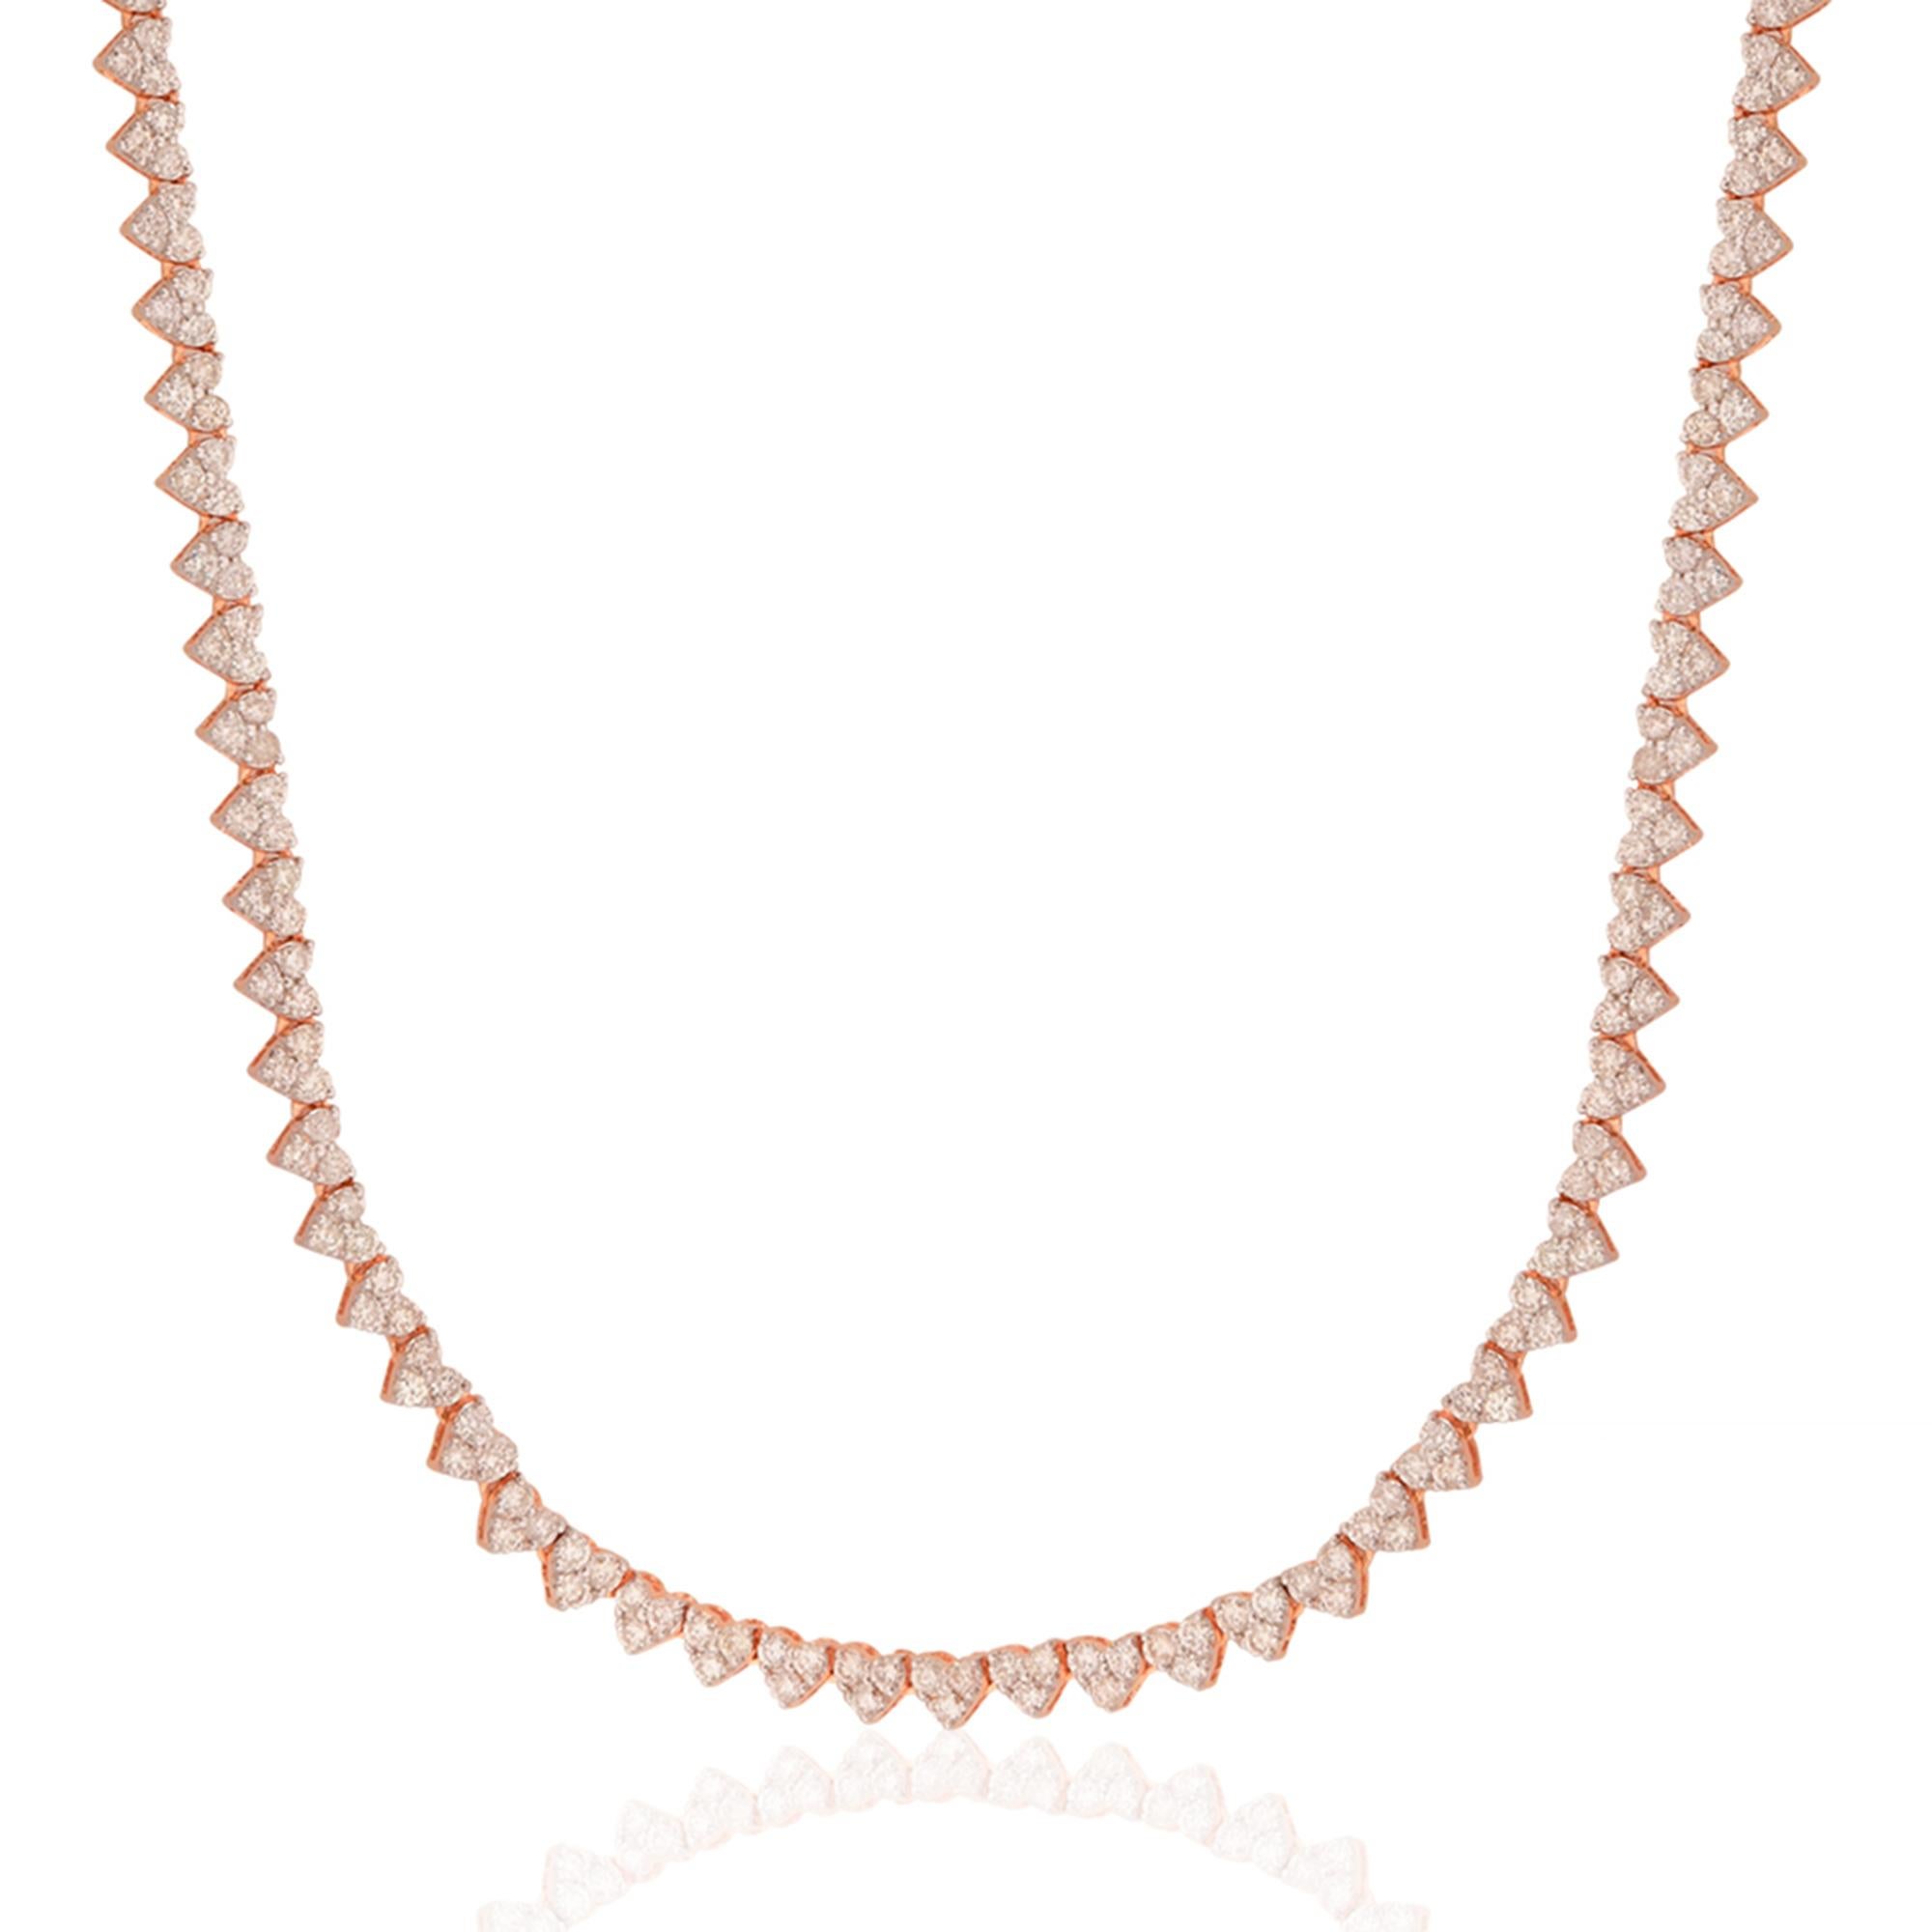 Whether you're looking for a gift for a loved one or treating yourself to a stunning piece of jewelry, this 3.70 carat SI clarity HI color diamond heart shape necklace in 18 karat rose gold is a remarkable choice. It exudes charm, sophistication,